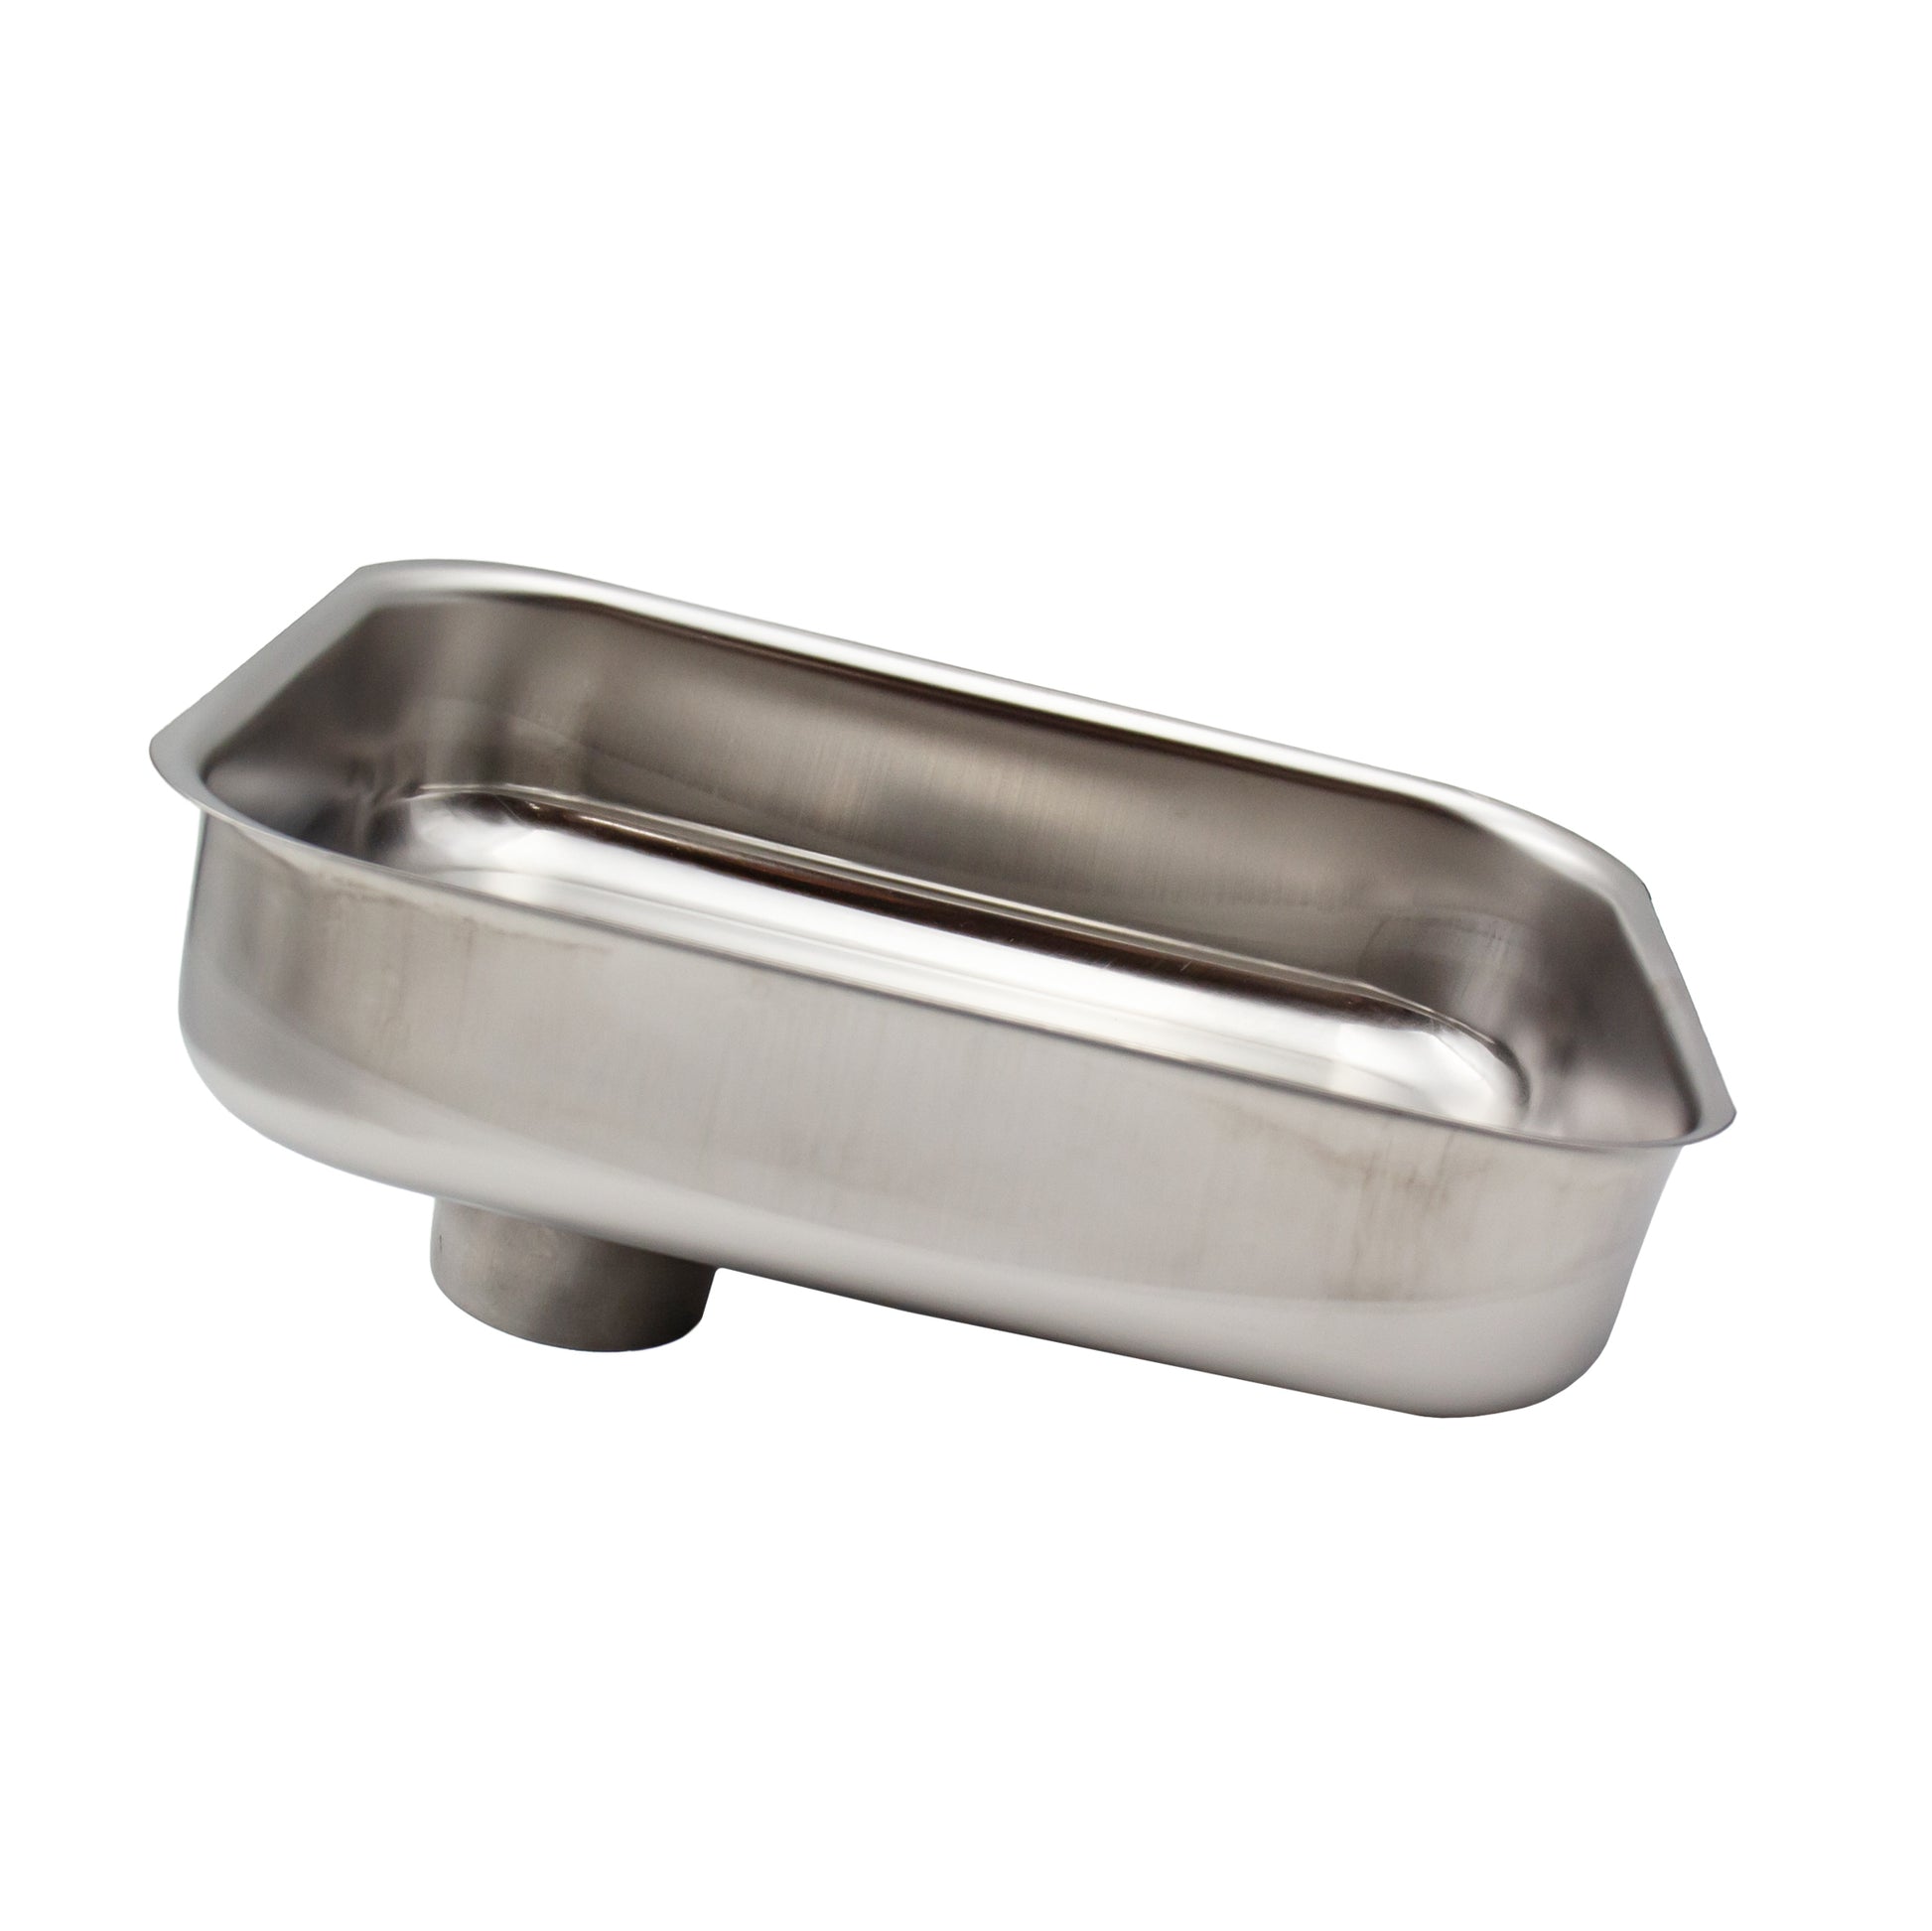 Stainless steel bowl to feed meat through the mincer